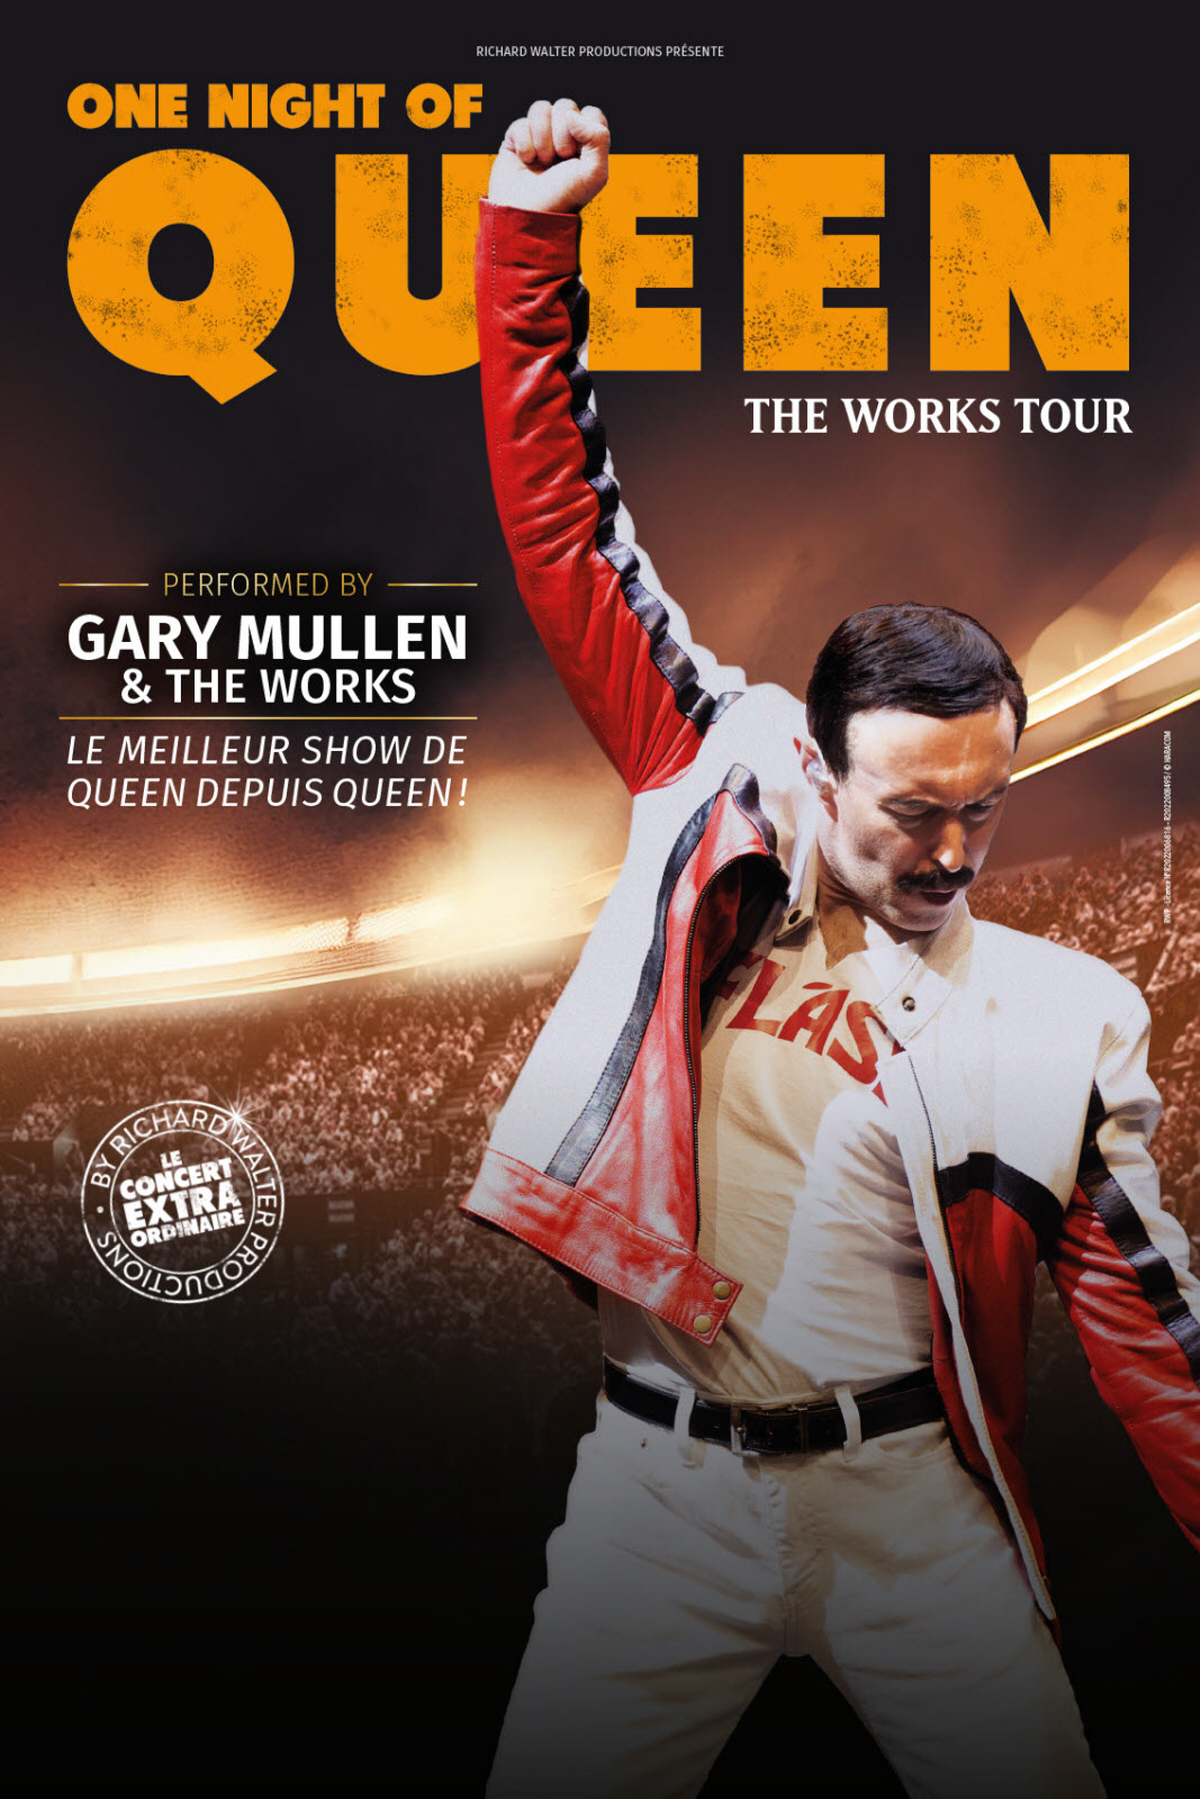 One Night Of Queen - The Works Tour en M.a.ch 36 Tickets